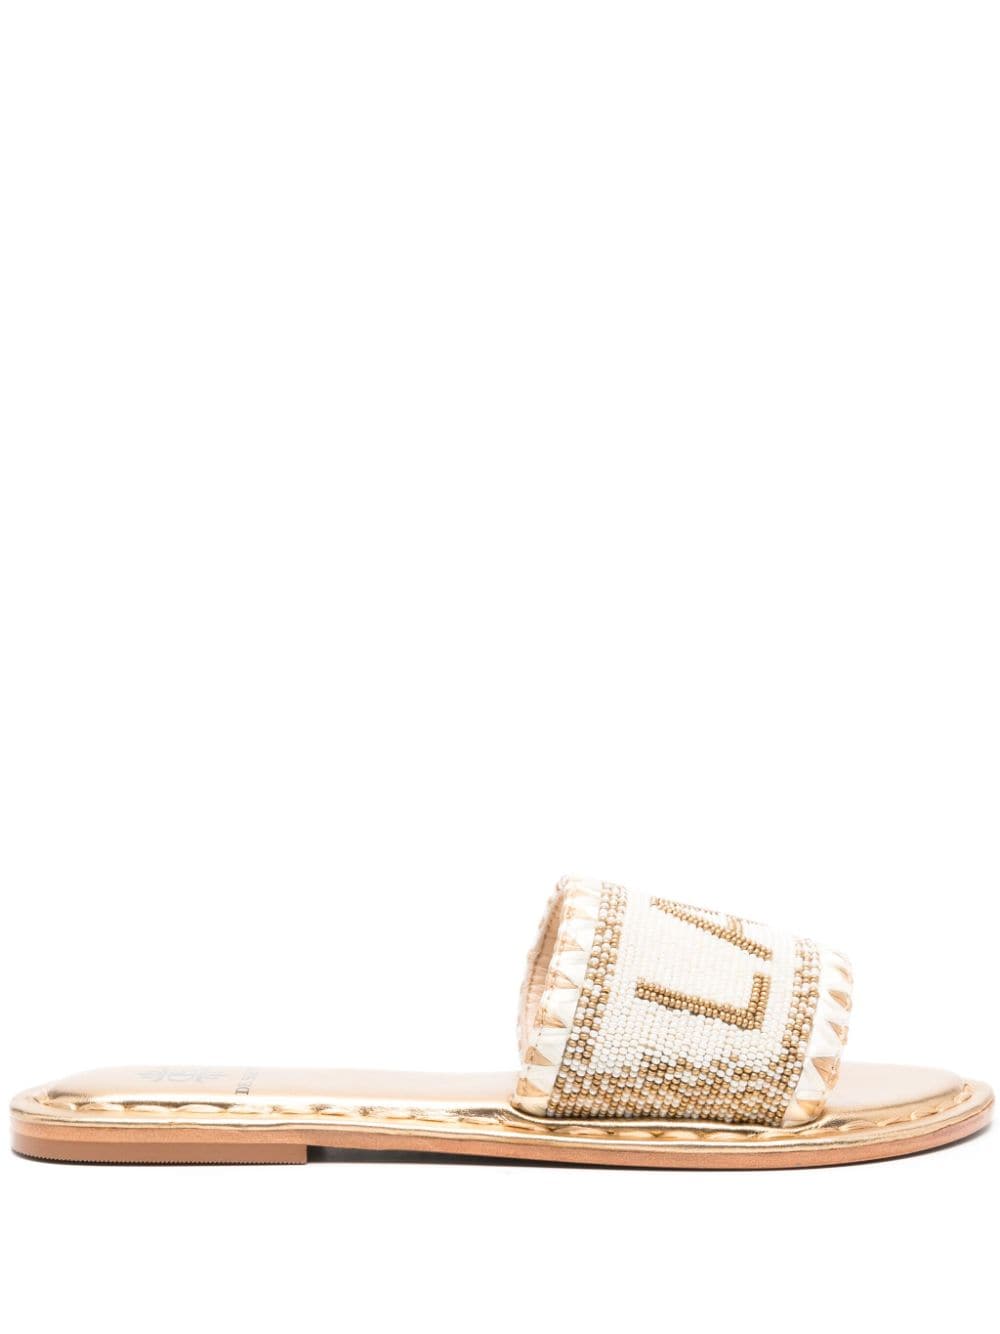 DE SIENA SHOES bead-embellished leather sandals - Oro